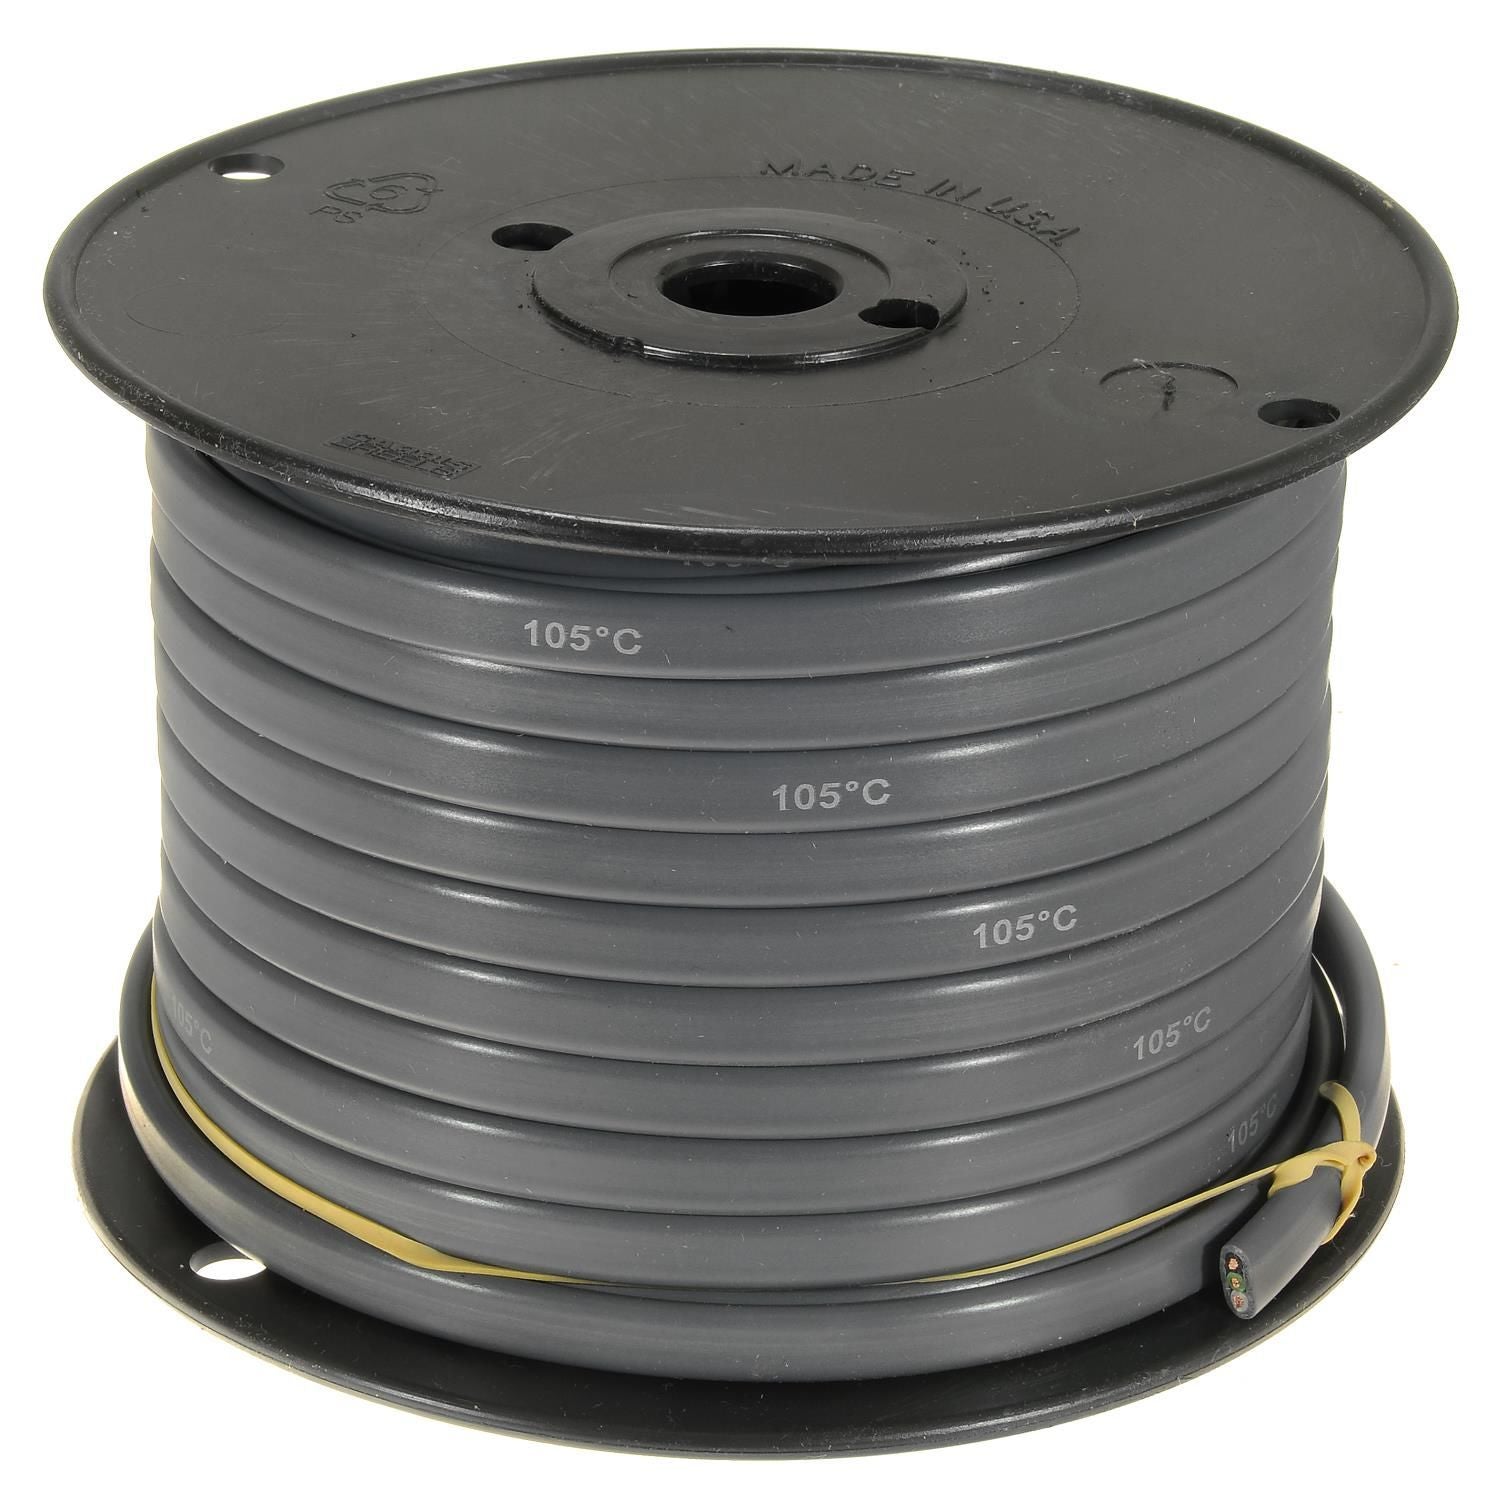 YSP WR127-100 Wells Flat Multi-Conductor Primary Wire (12G, 3 Wire)